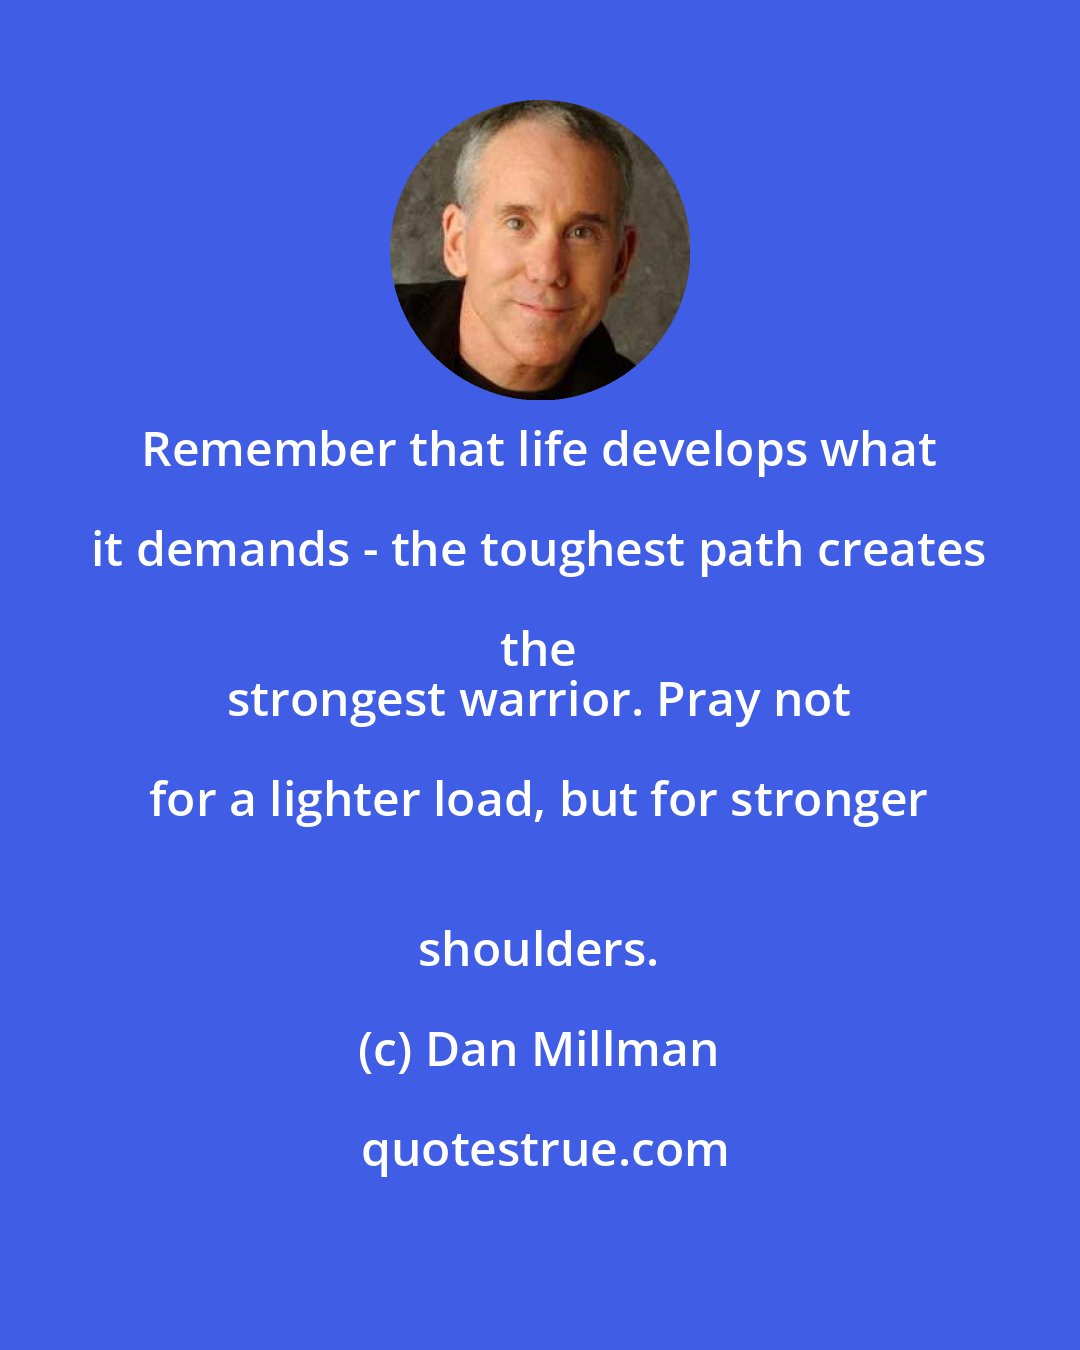 Dan Millman: Remember that life develops what it demands - the toughest path creates the 
 strongest warrior. Pray not for a lighter load, but for stronger 
 shoulders.